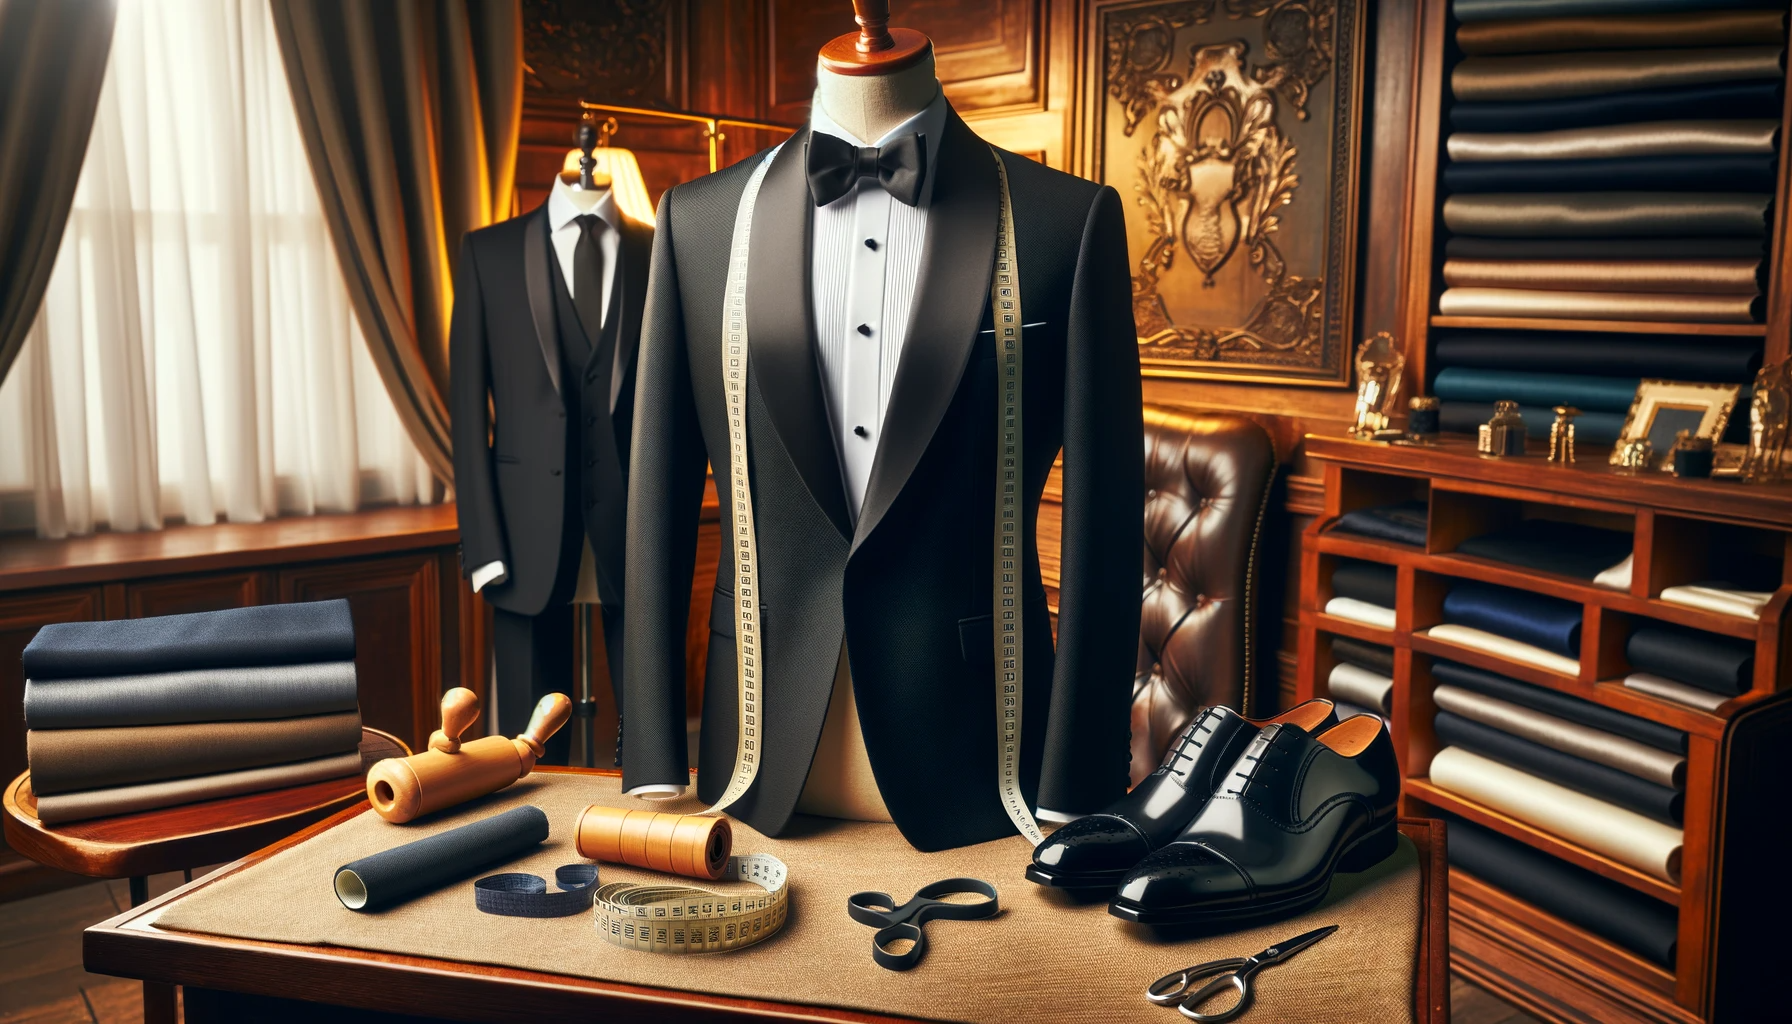 A tuxedo and its accessories